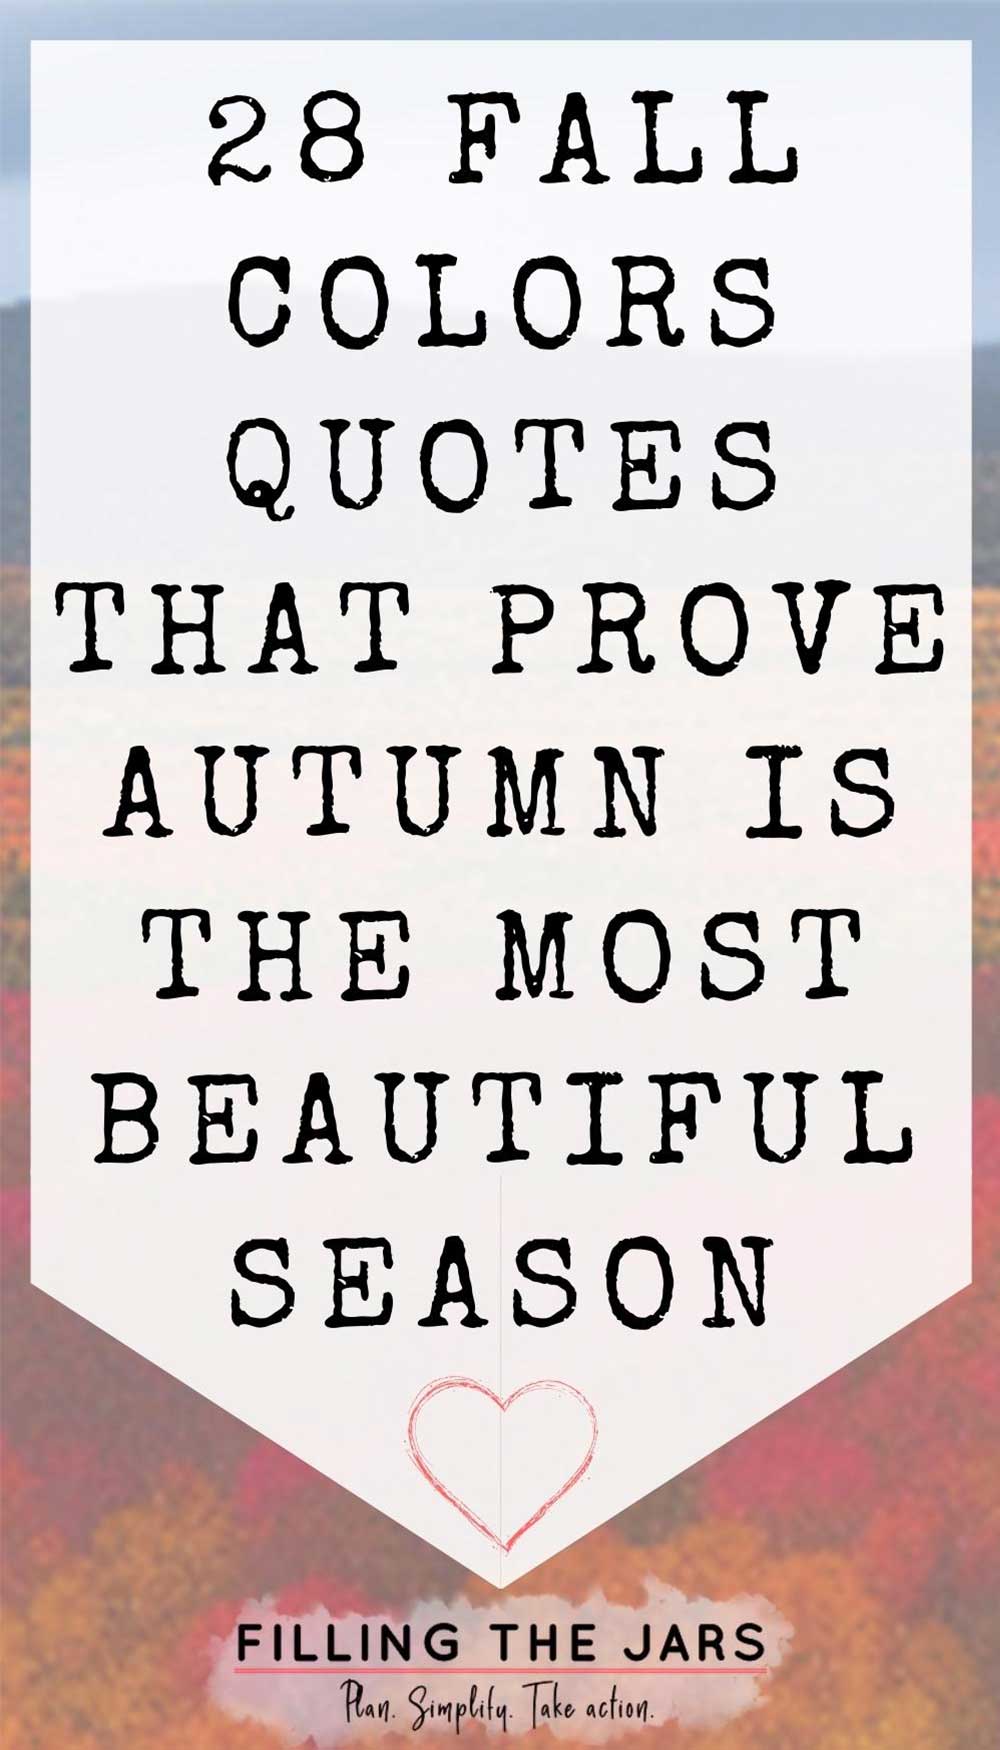 28 Fall Colors Quotes That Prove Autumn Is The Most Beautiful Season |  Filling the Jars